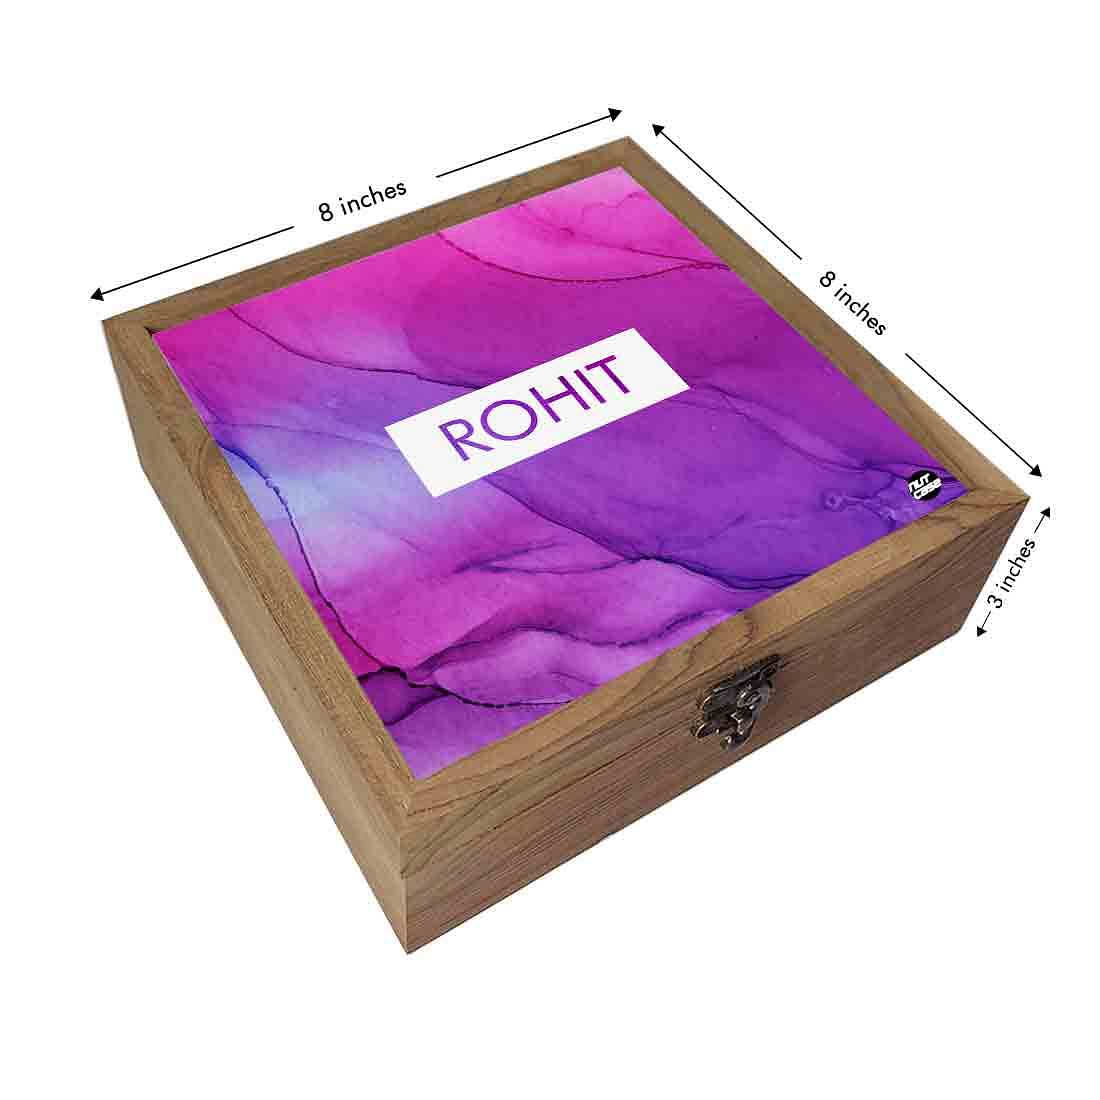 Custom Personalized Gifts Jewelry Box for Women - Purple Ink Watercolor Nutcase